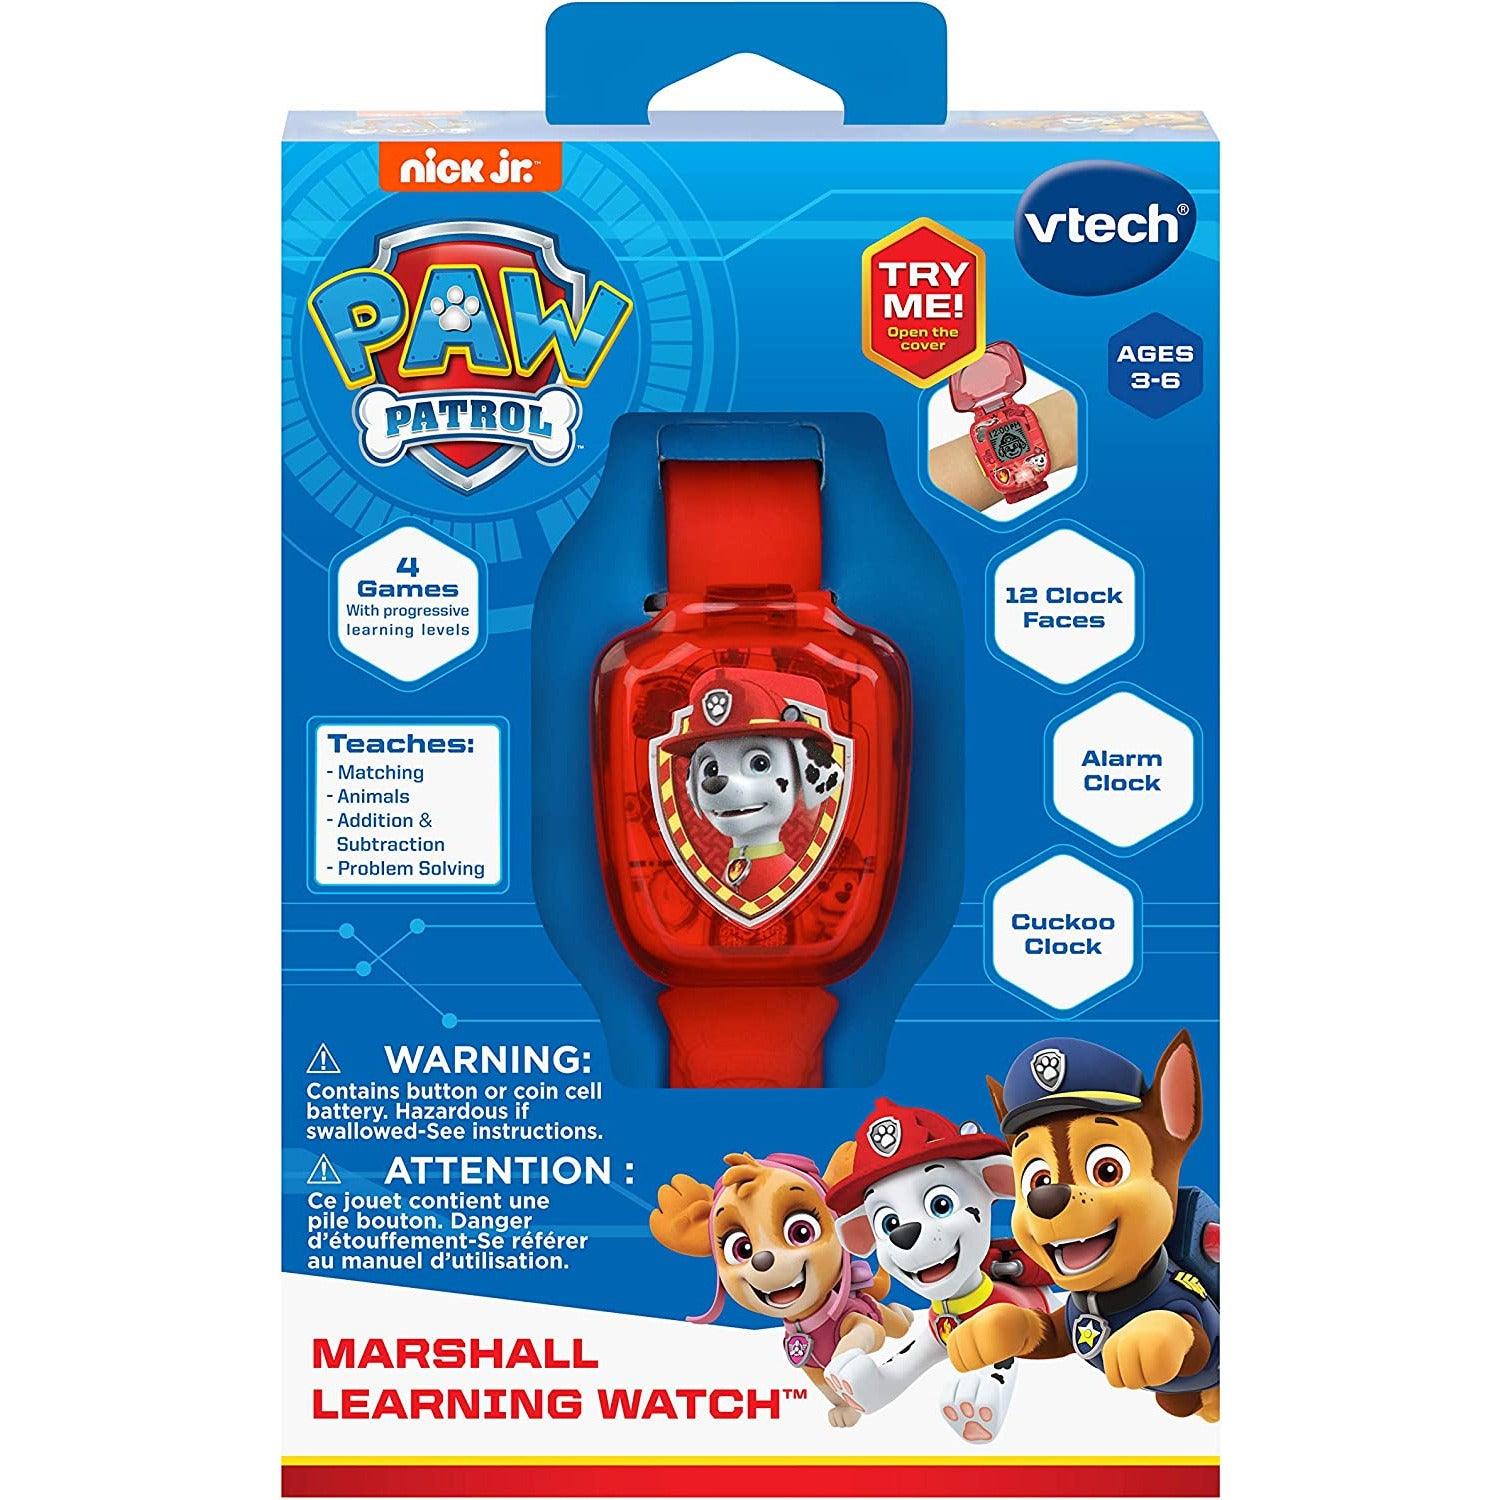 VTech PAW Patrol Marscall Learning Watch - Red - BumbleToys - 5-7 Years, Boys, Girls, Kids, Paw Patrol, Pre-Order, Watch